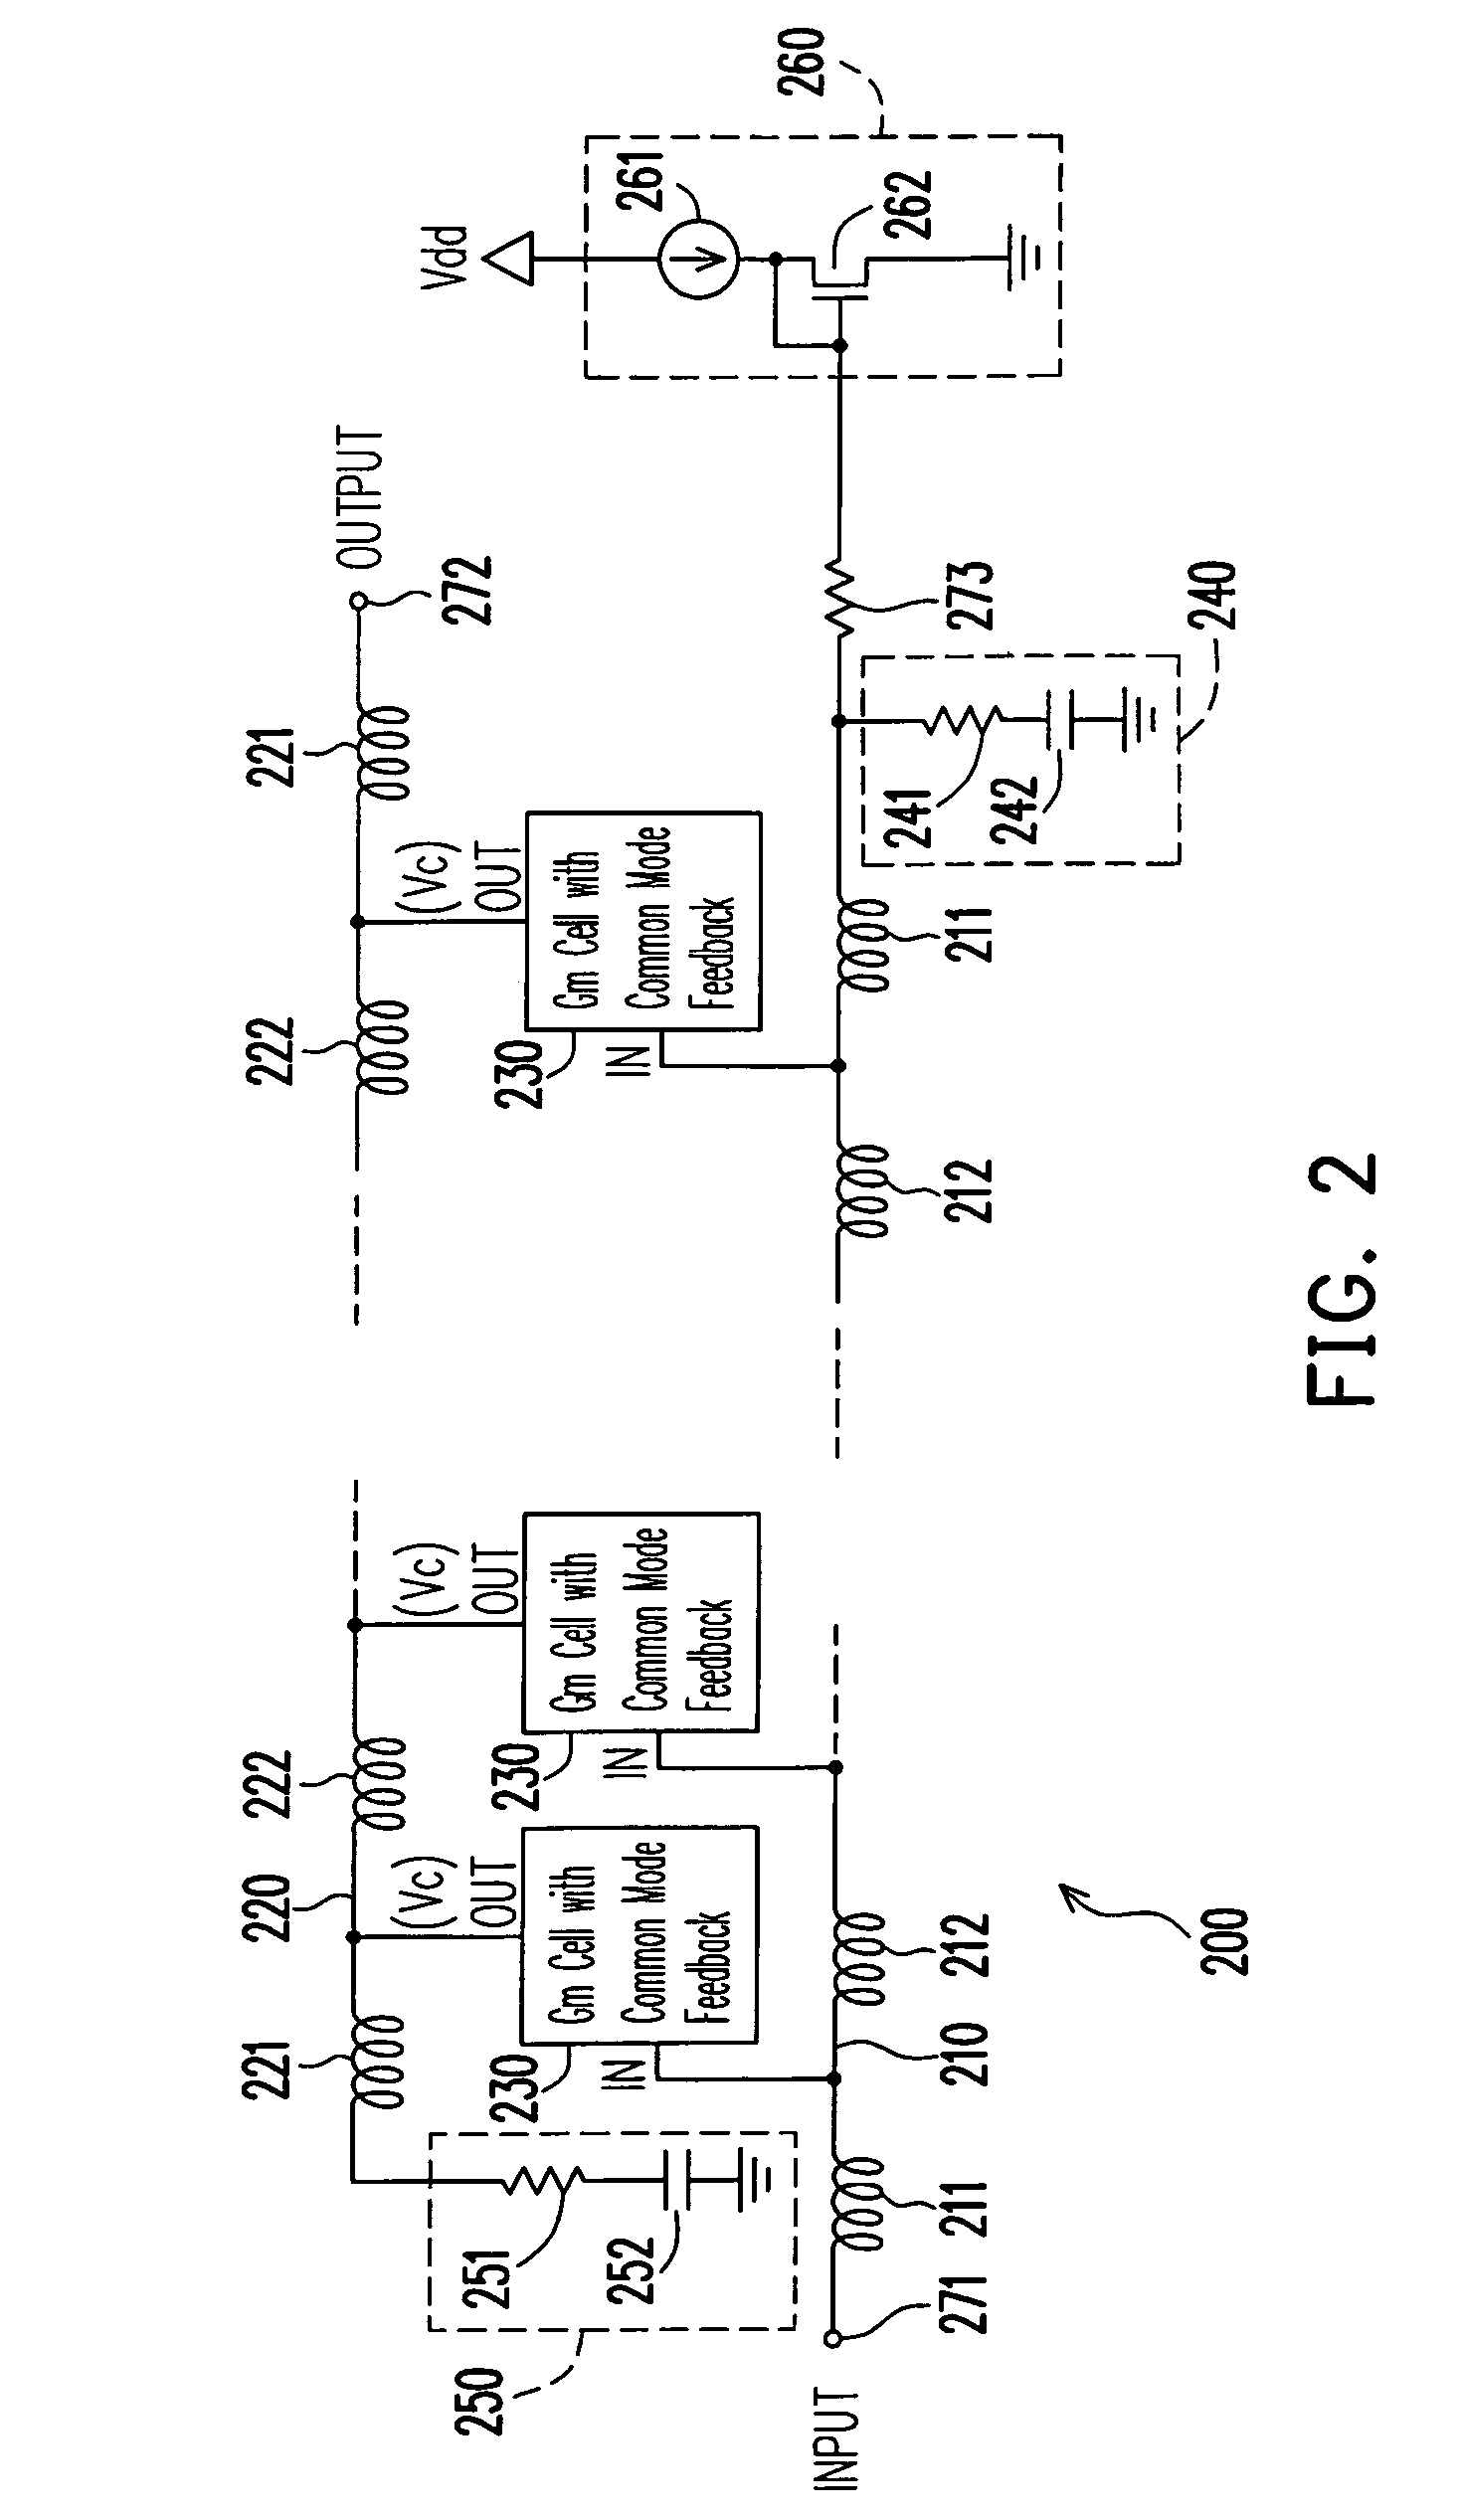 Low power comsumption, low noise and high power gain distributed amplifiers for communication systems